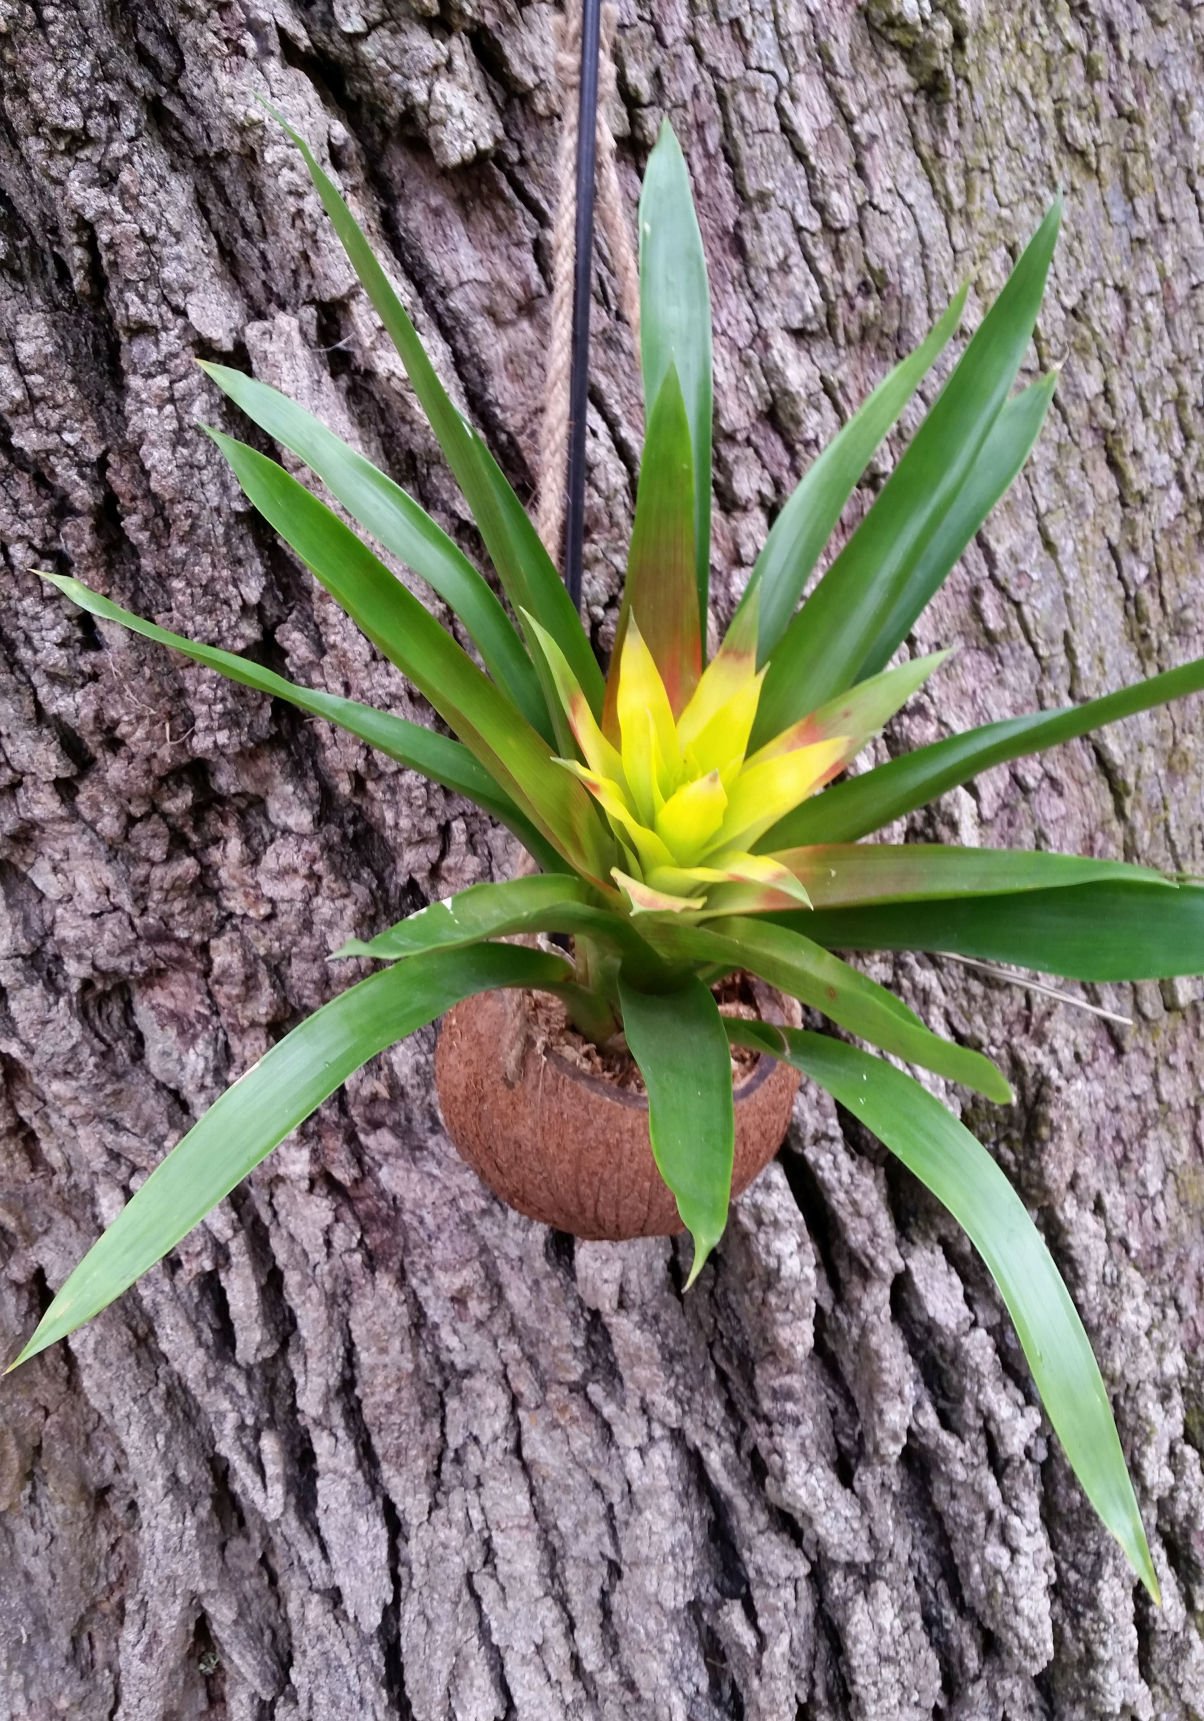 Gardeners Dirt Add A Touch Of The Tropics With Bromeliads Home And Garden Victoriaadvocate Com